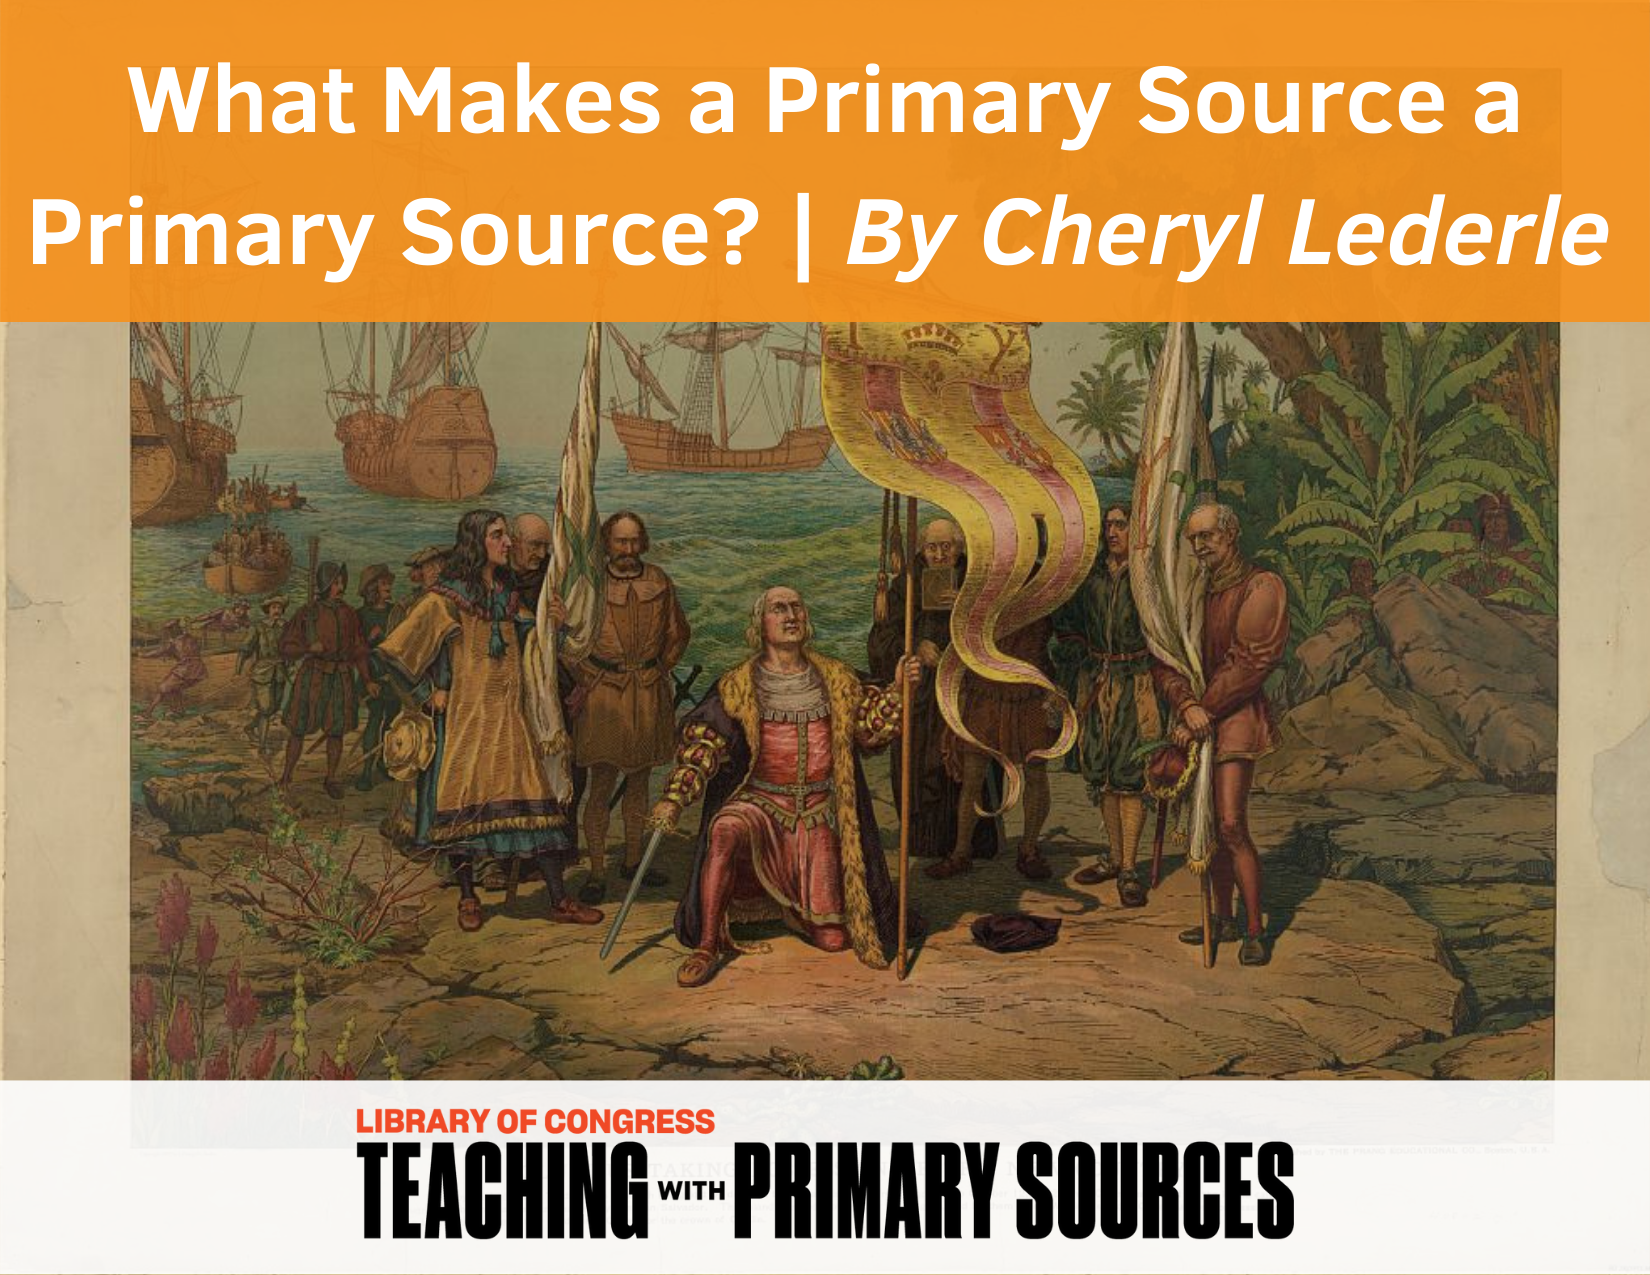 What Makes a Primary Source a Primary Source?